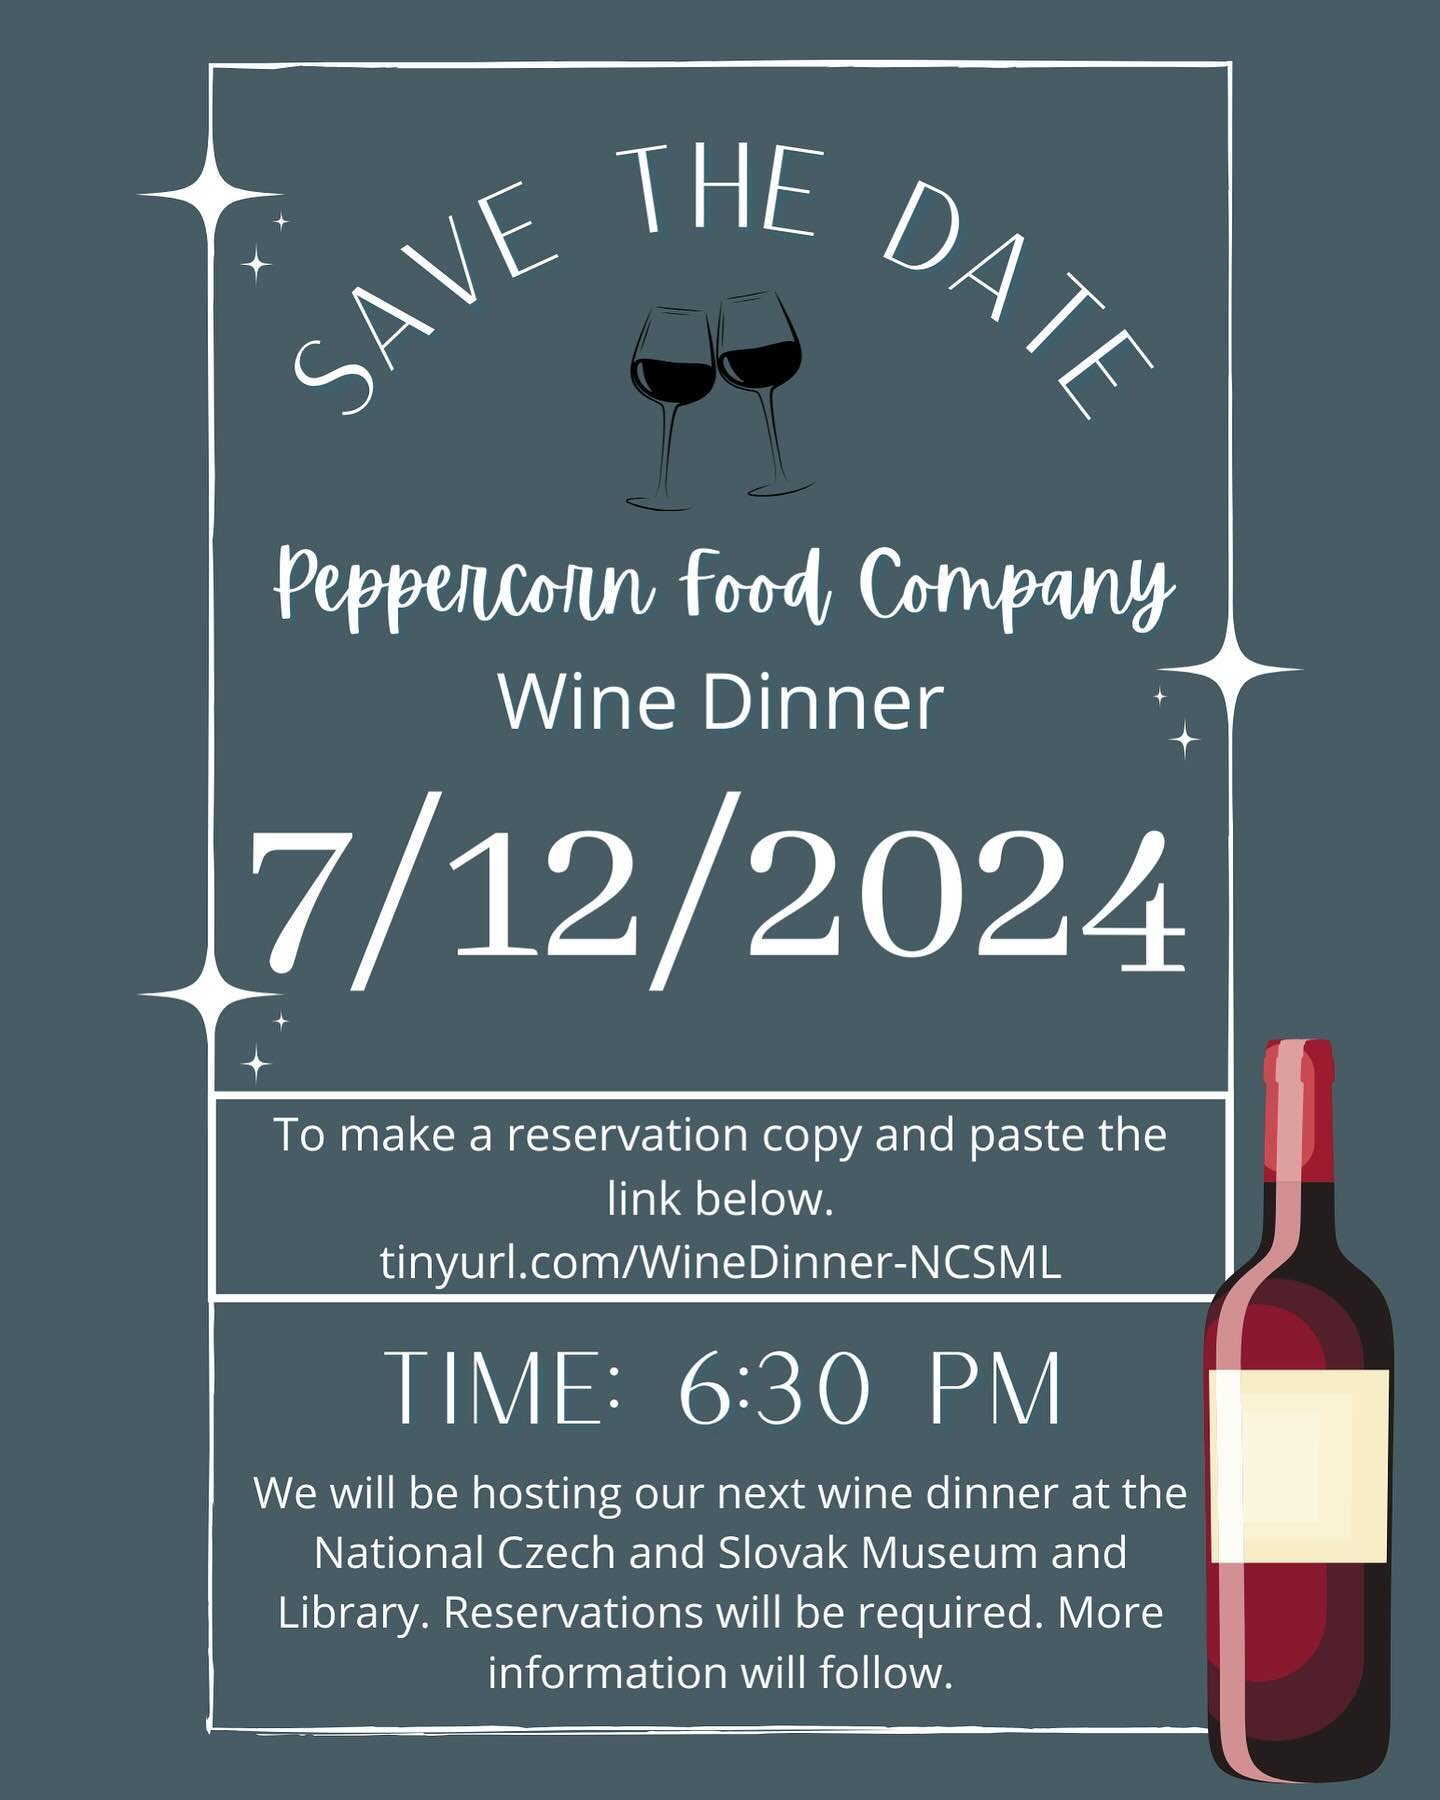 Stay tuned for more details!  Save the date and secure your spot before it&rsquo;s gone. More info coming soon. 🍷